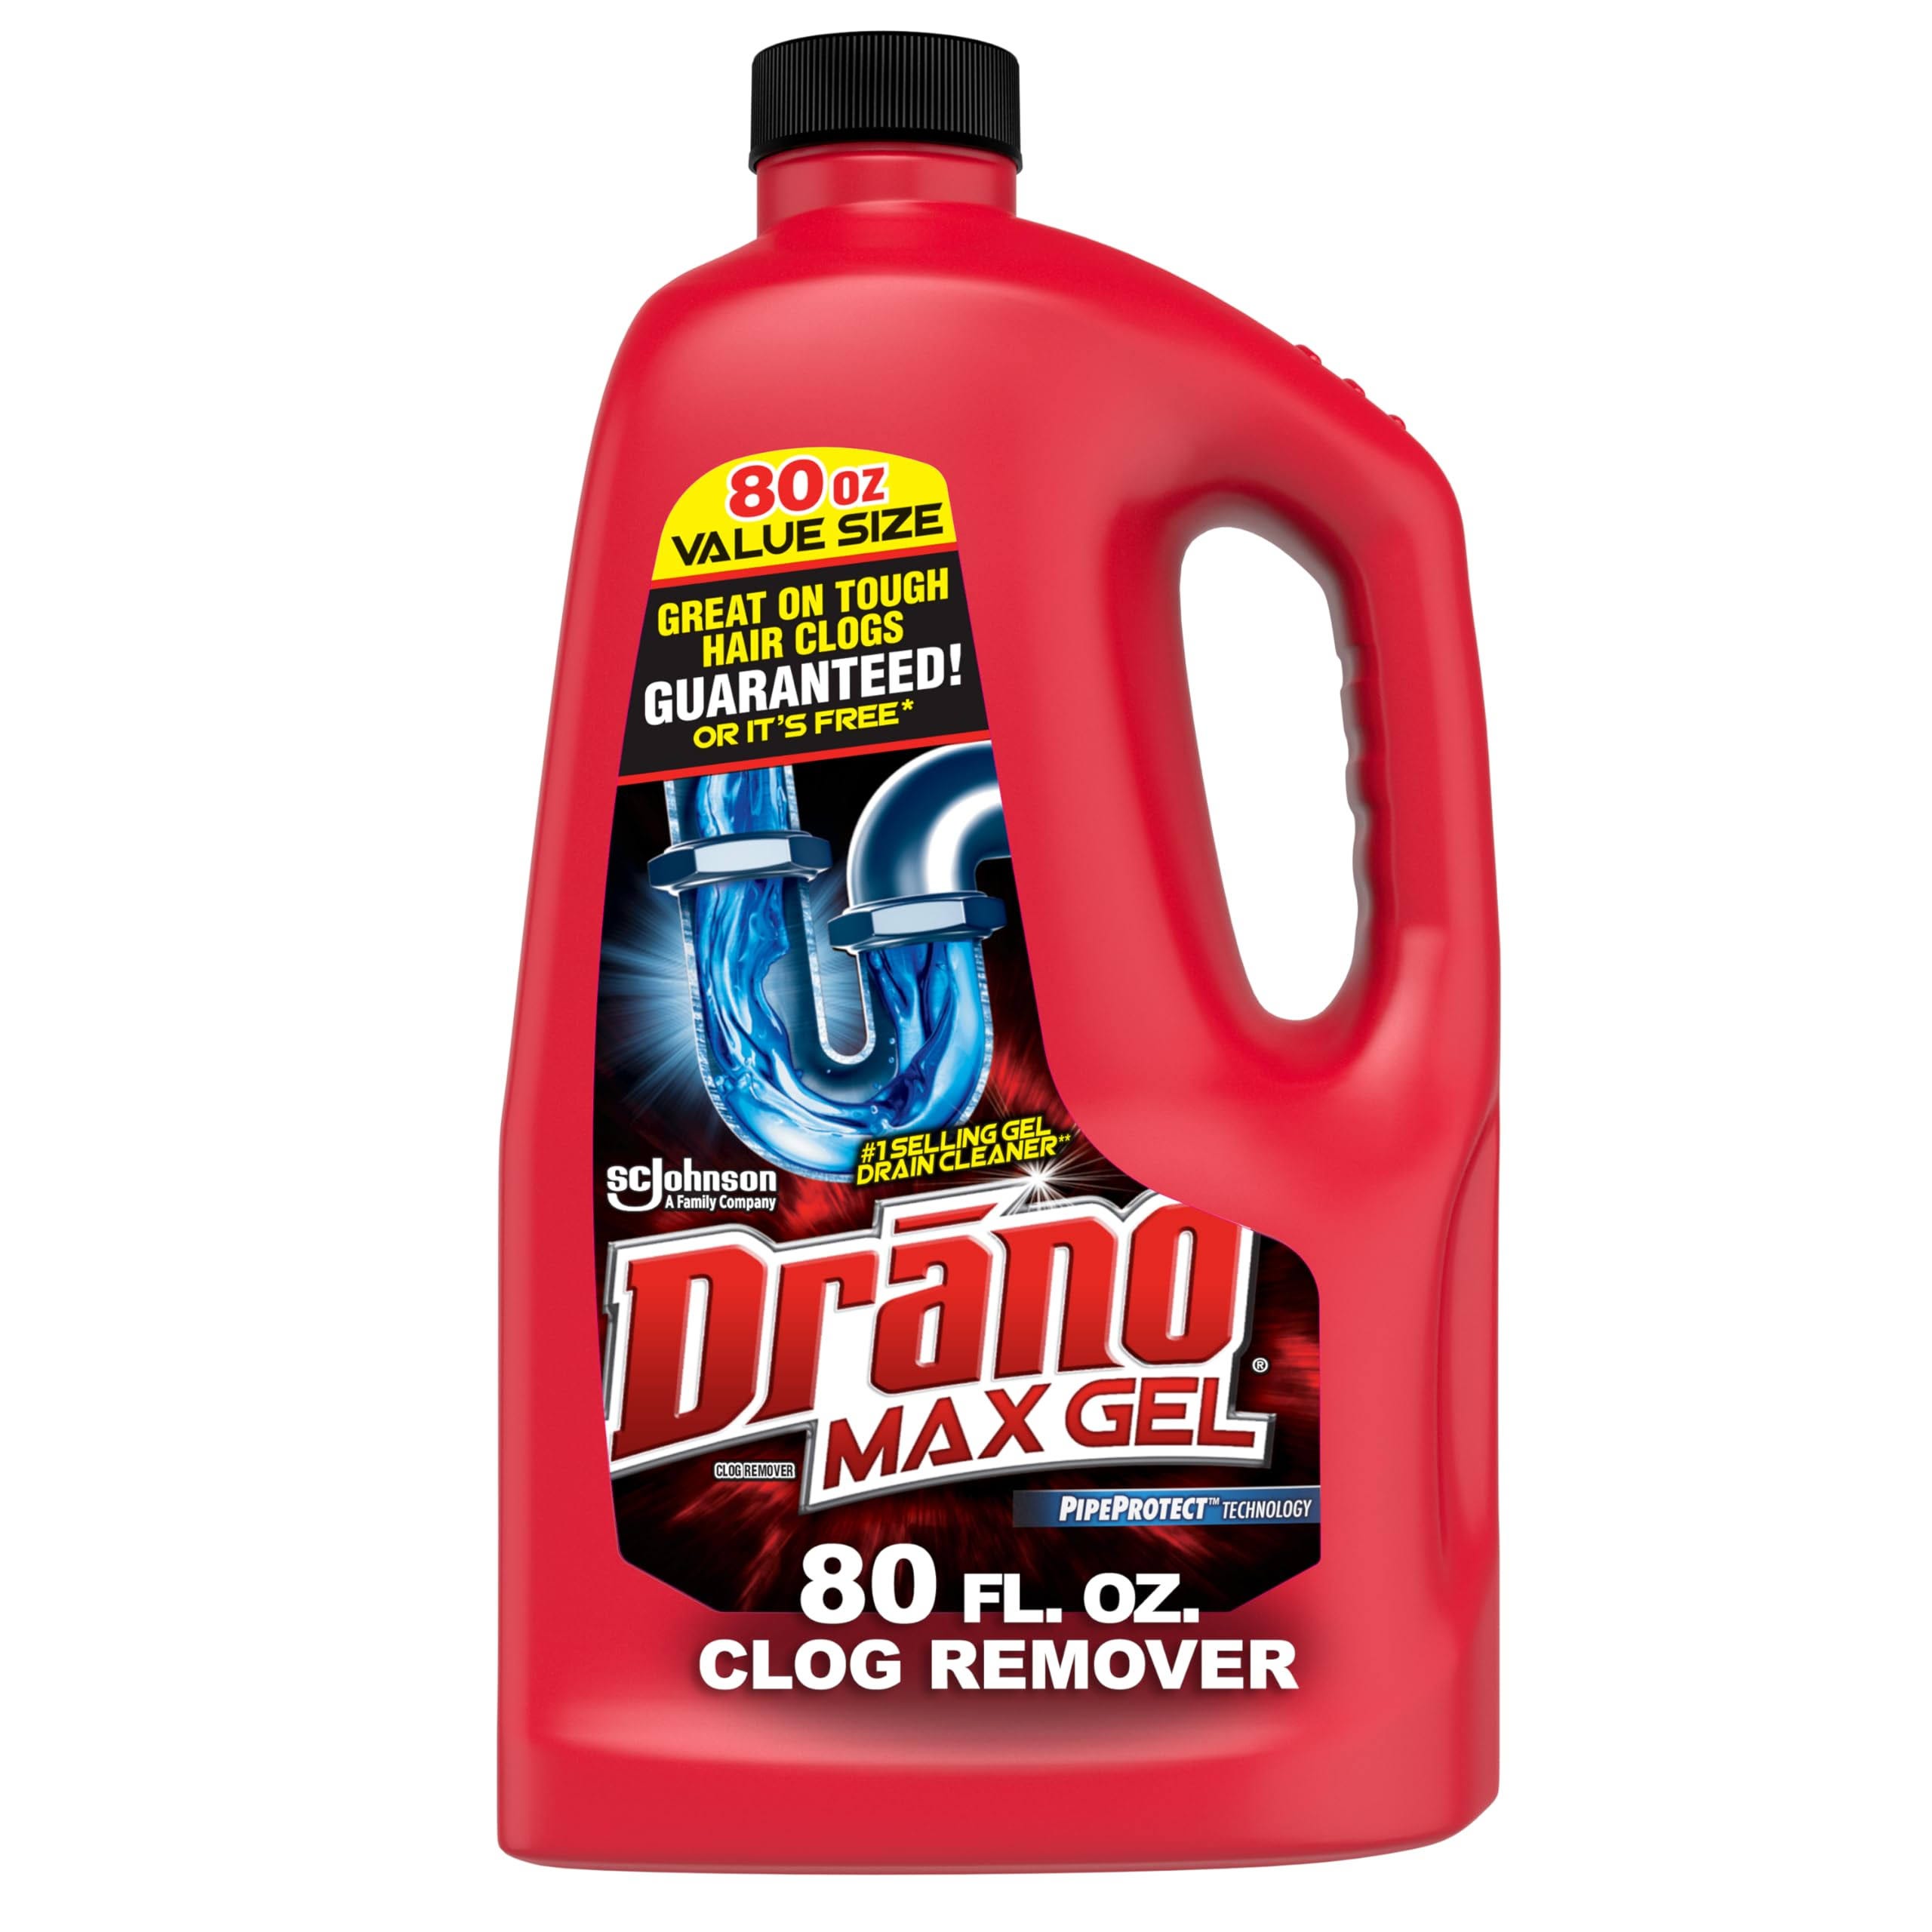 Thrift Drain Cleaner: Designed for Efficient Hair and Gunk Removal | Image